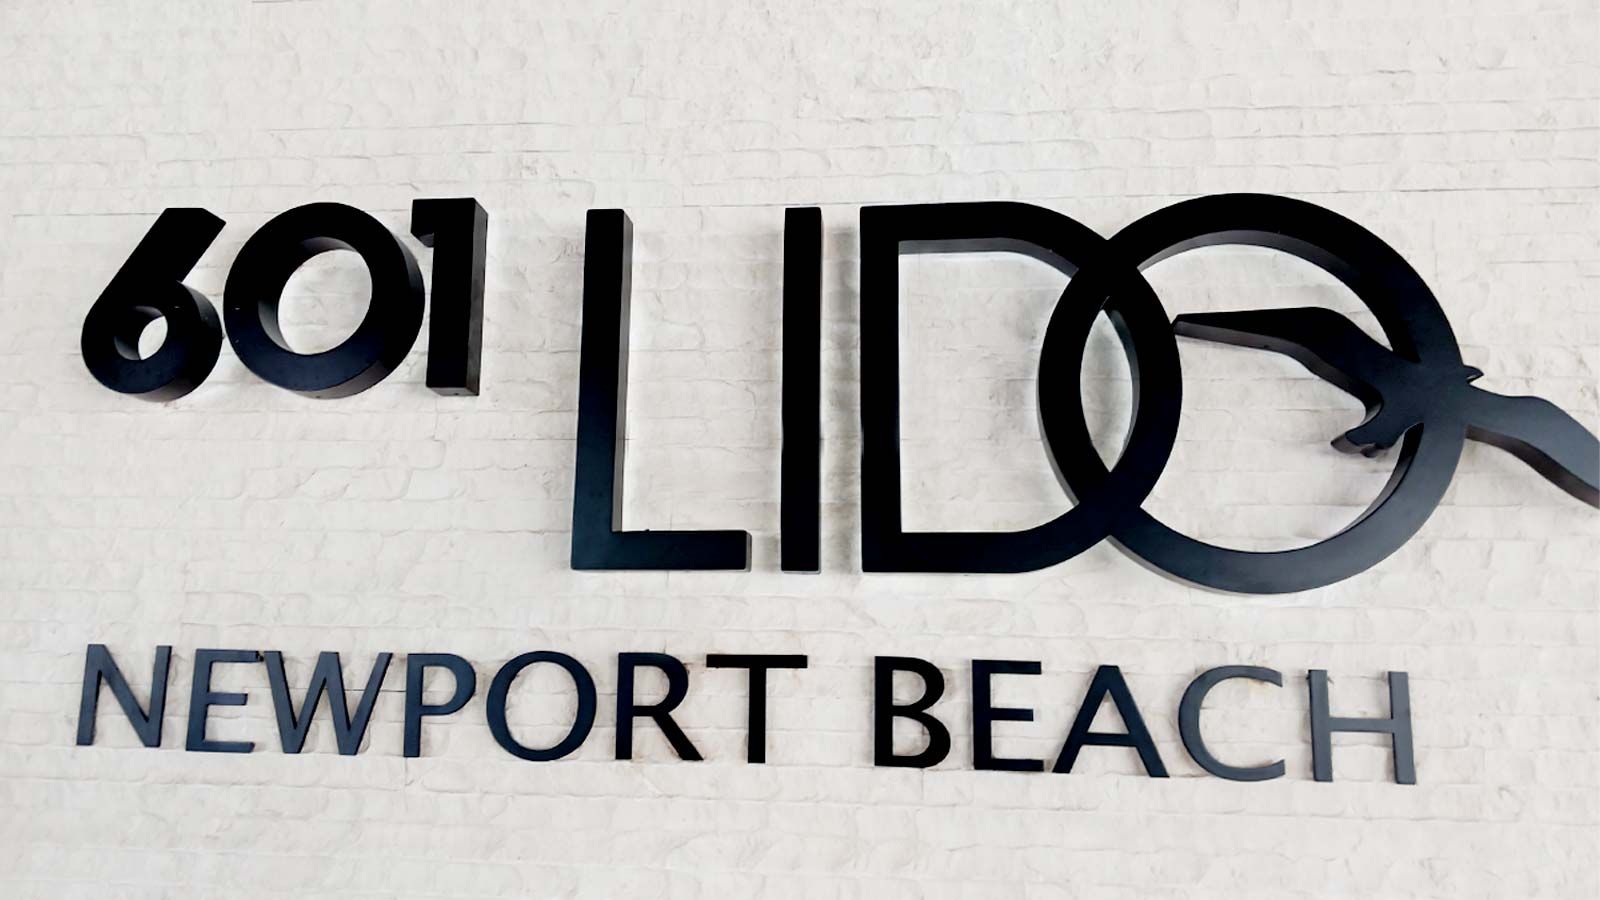 601 Lido backlit letters mounted on the wall